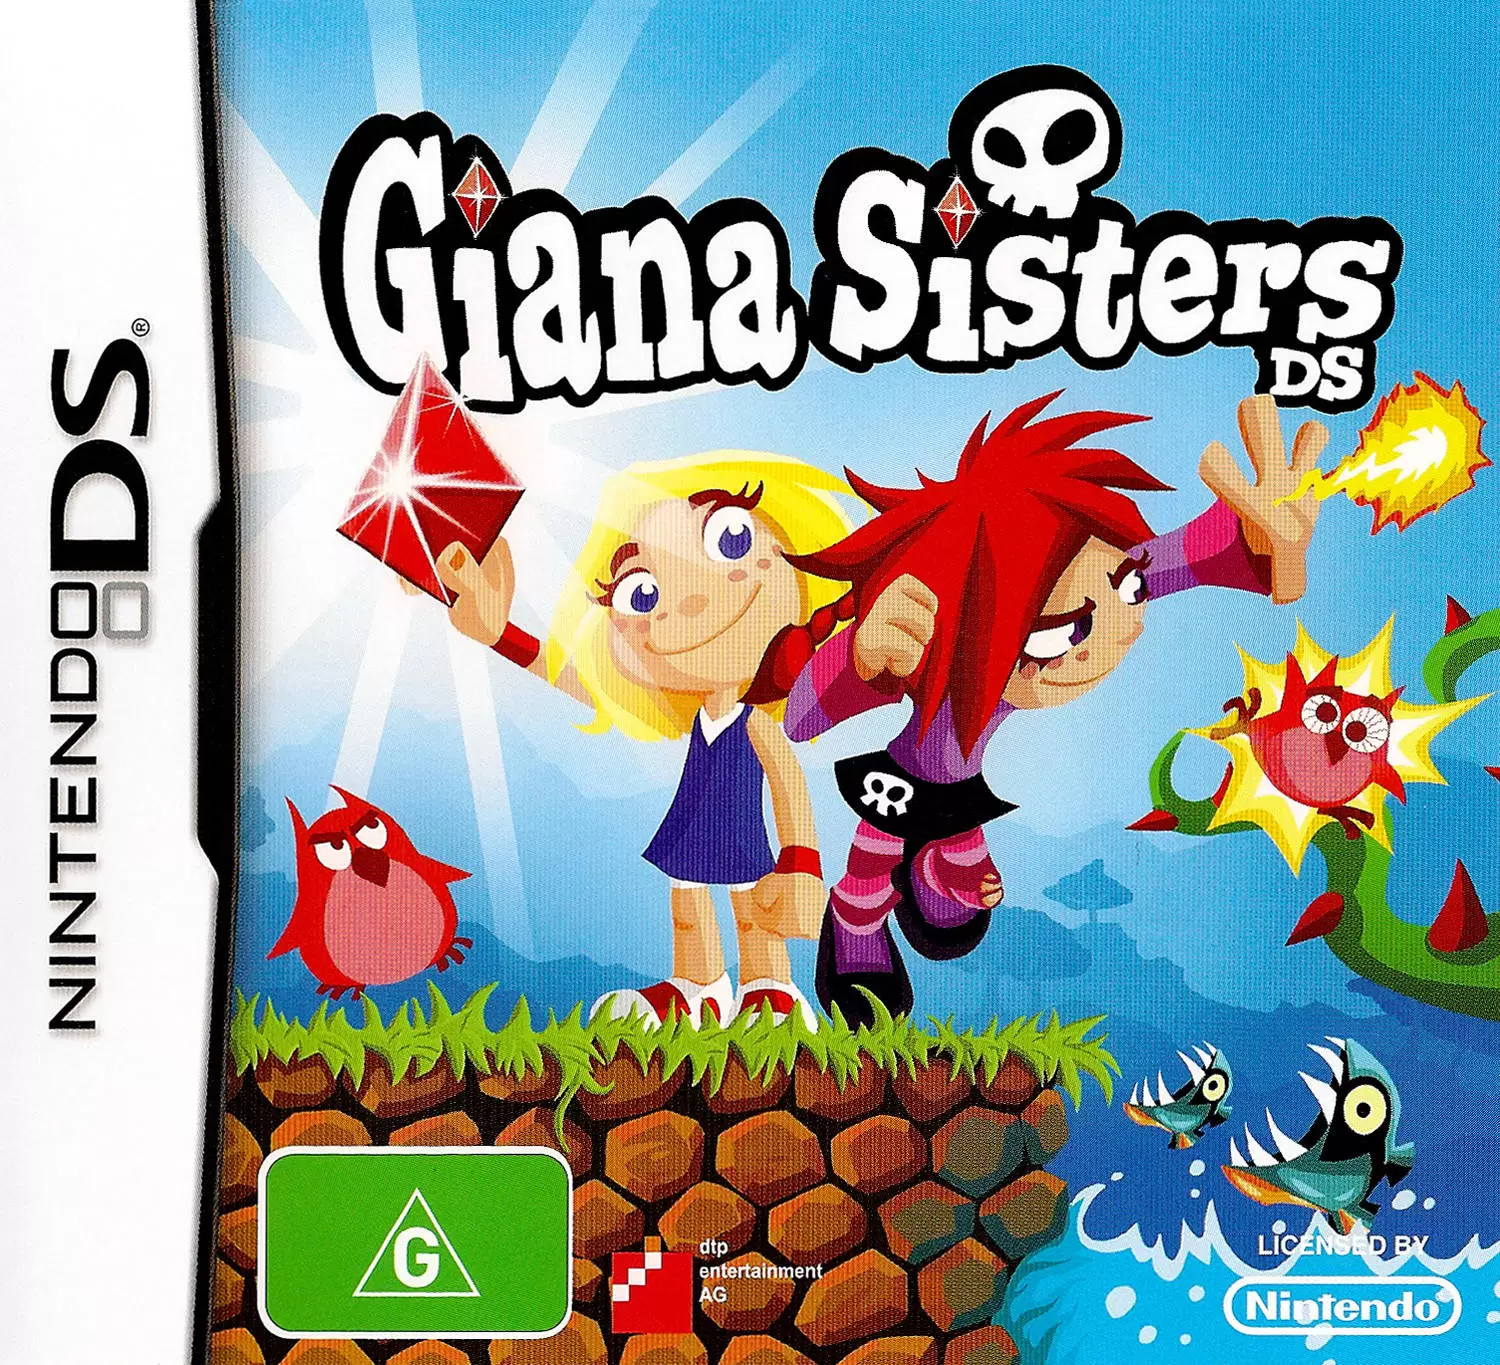 Nintendo DS Games - Giana Sisters